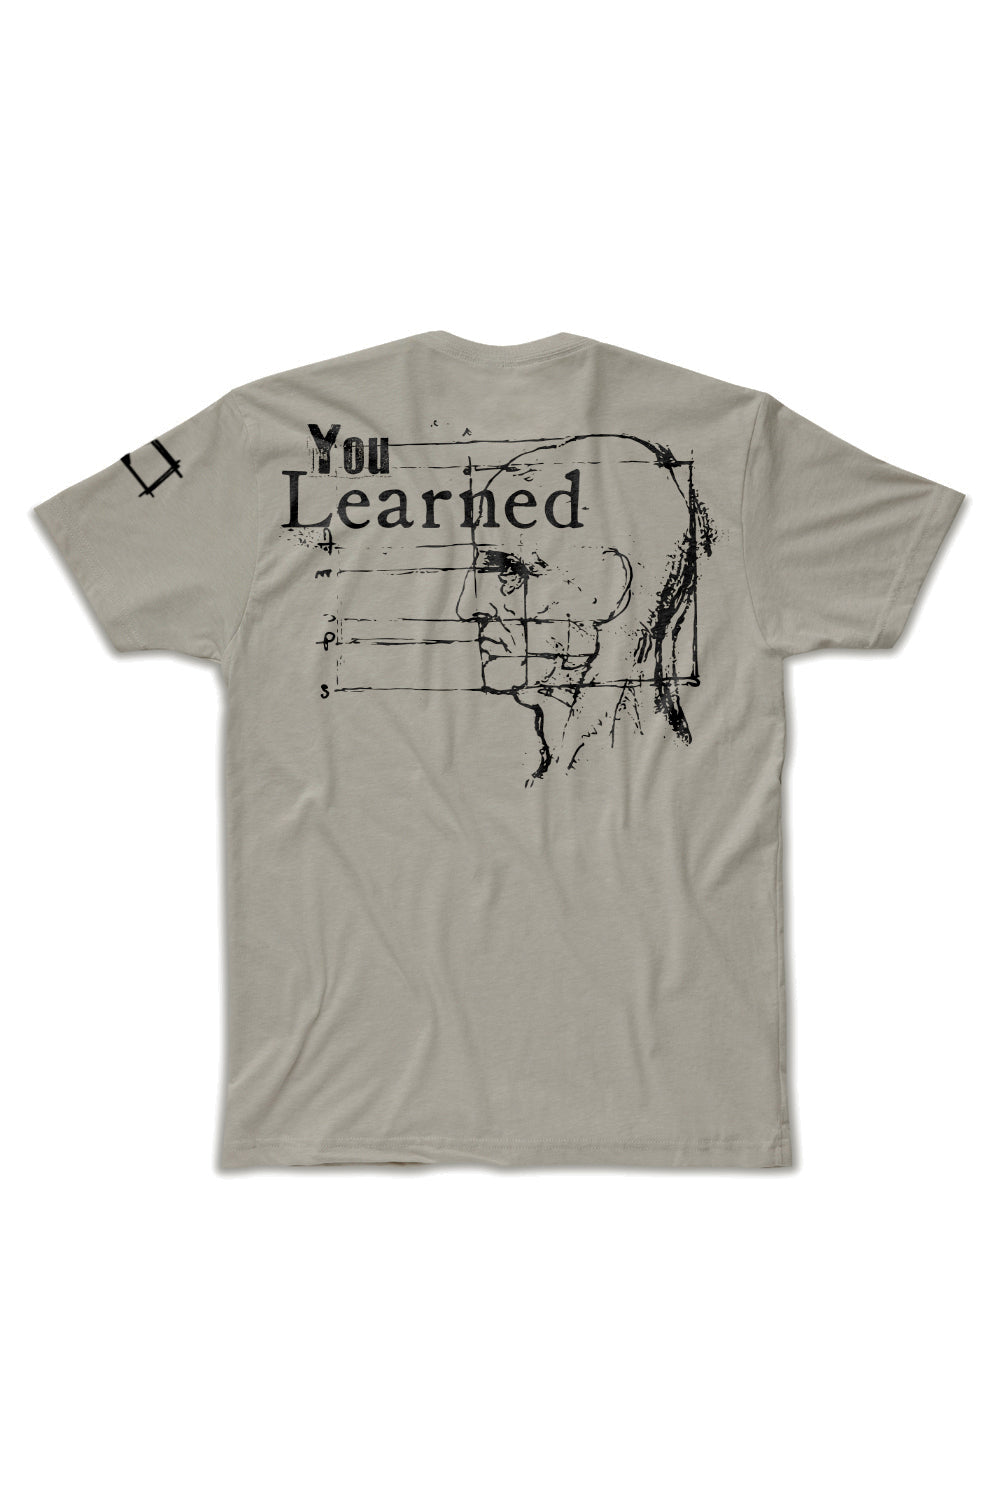 Good. You Learned - March '23 Shirt